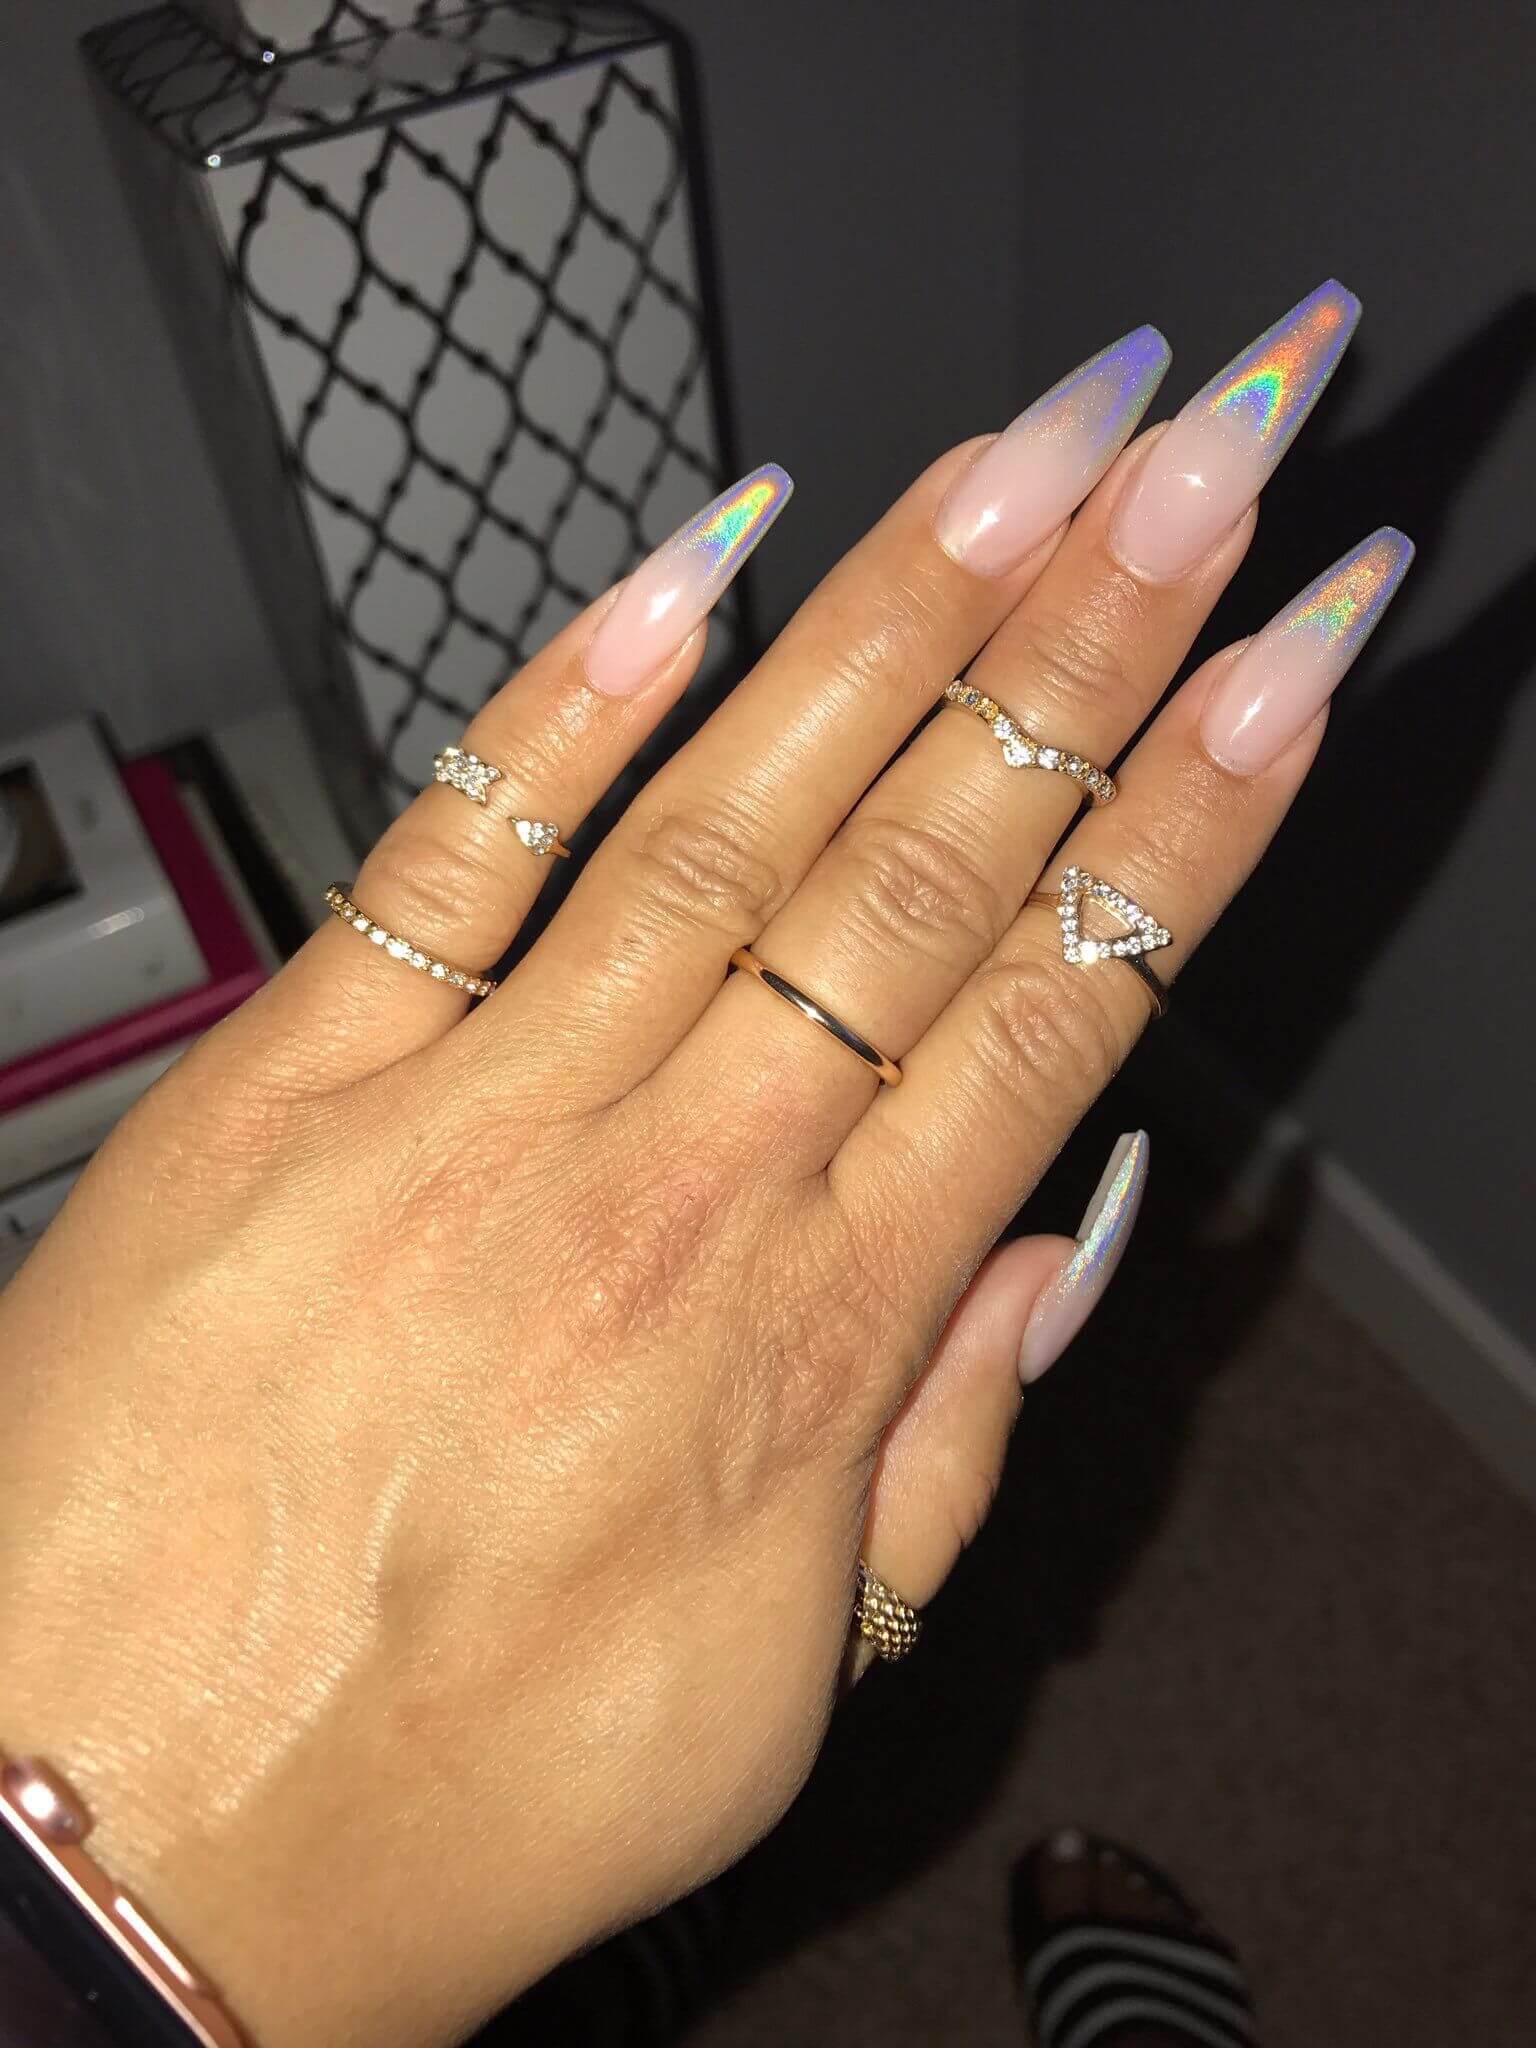 Holographic Nail Stickers Or Decals